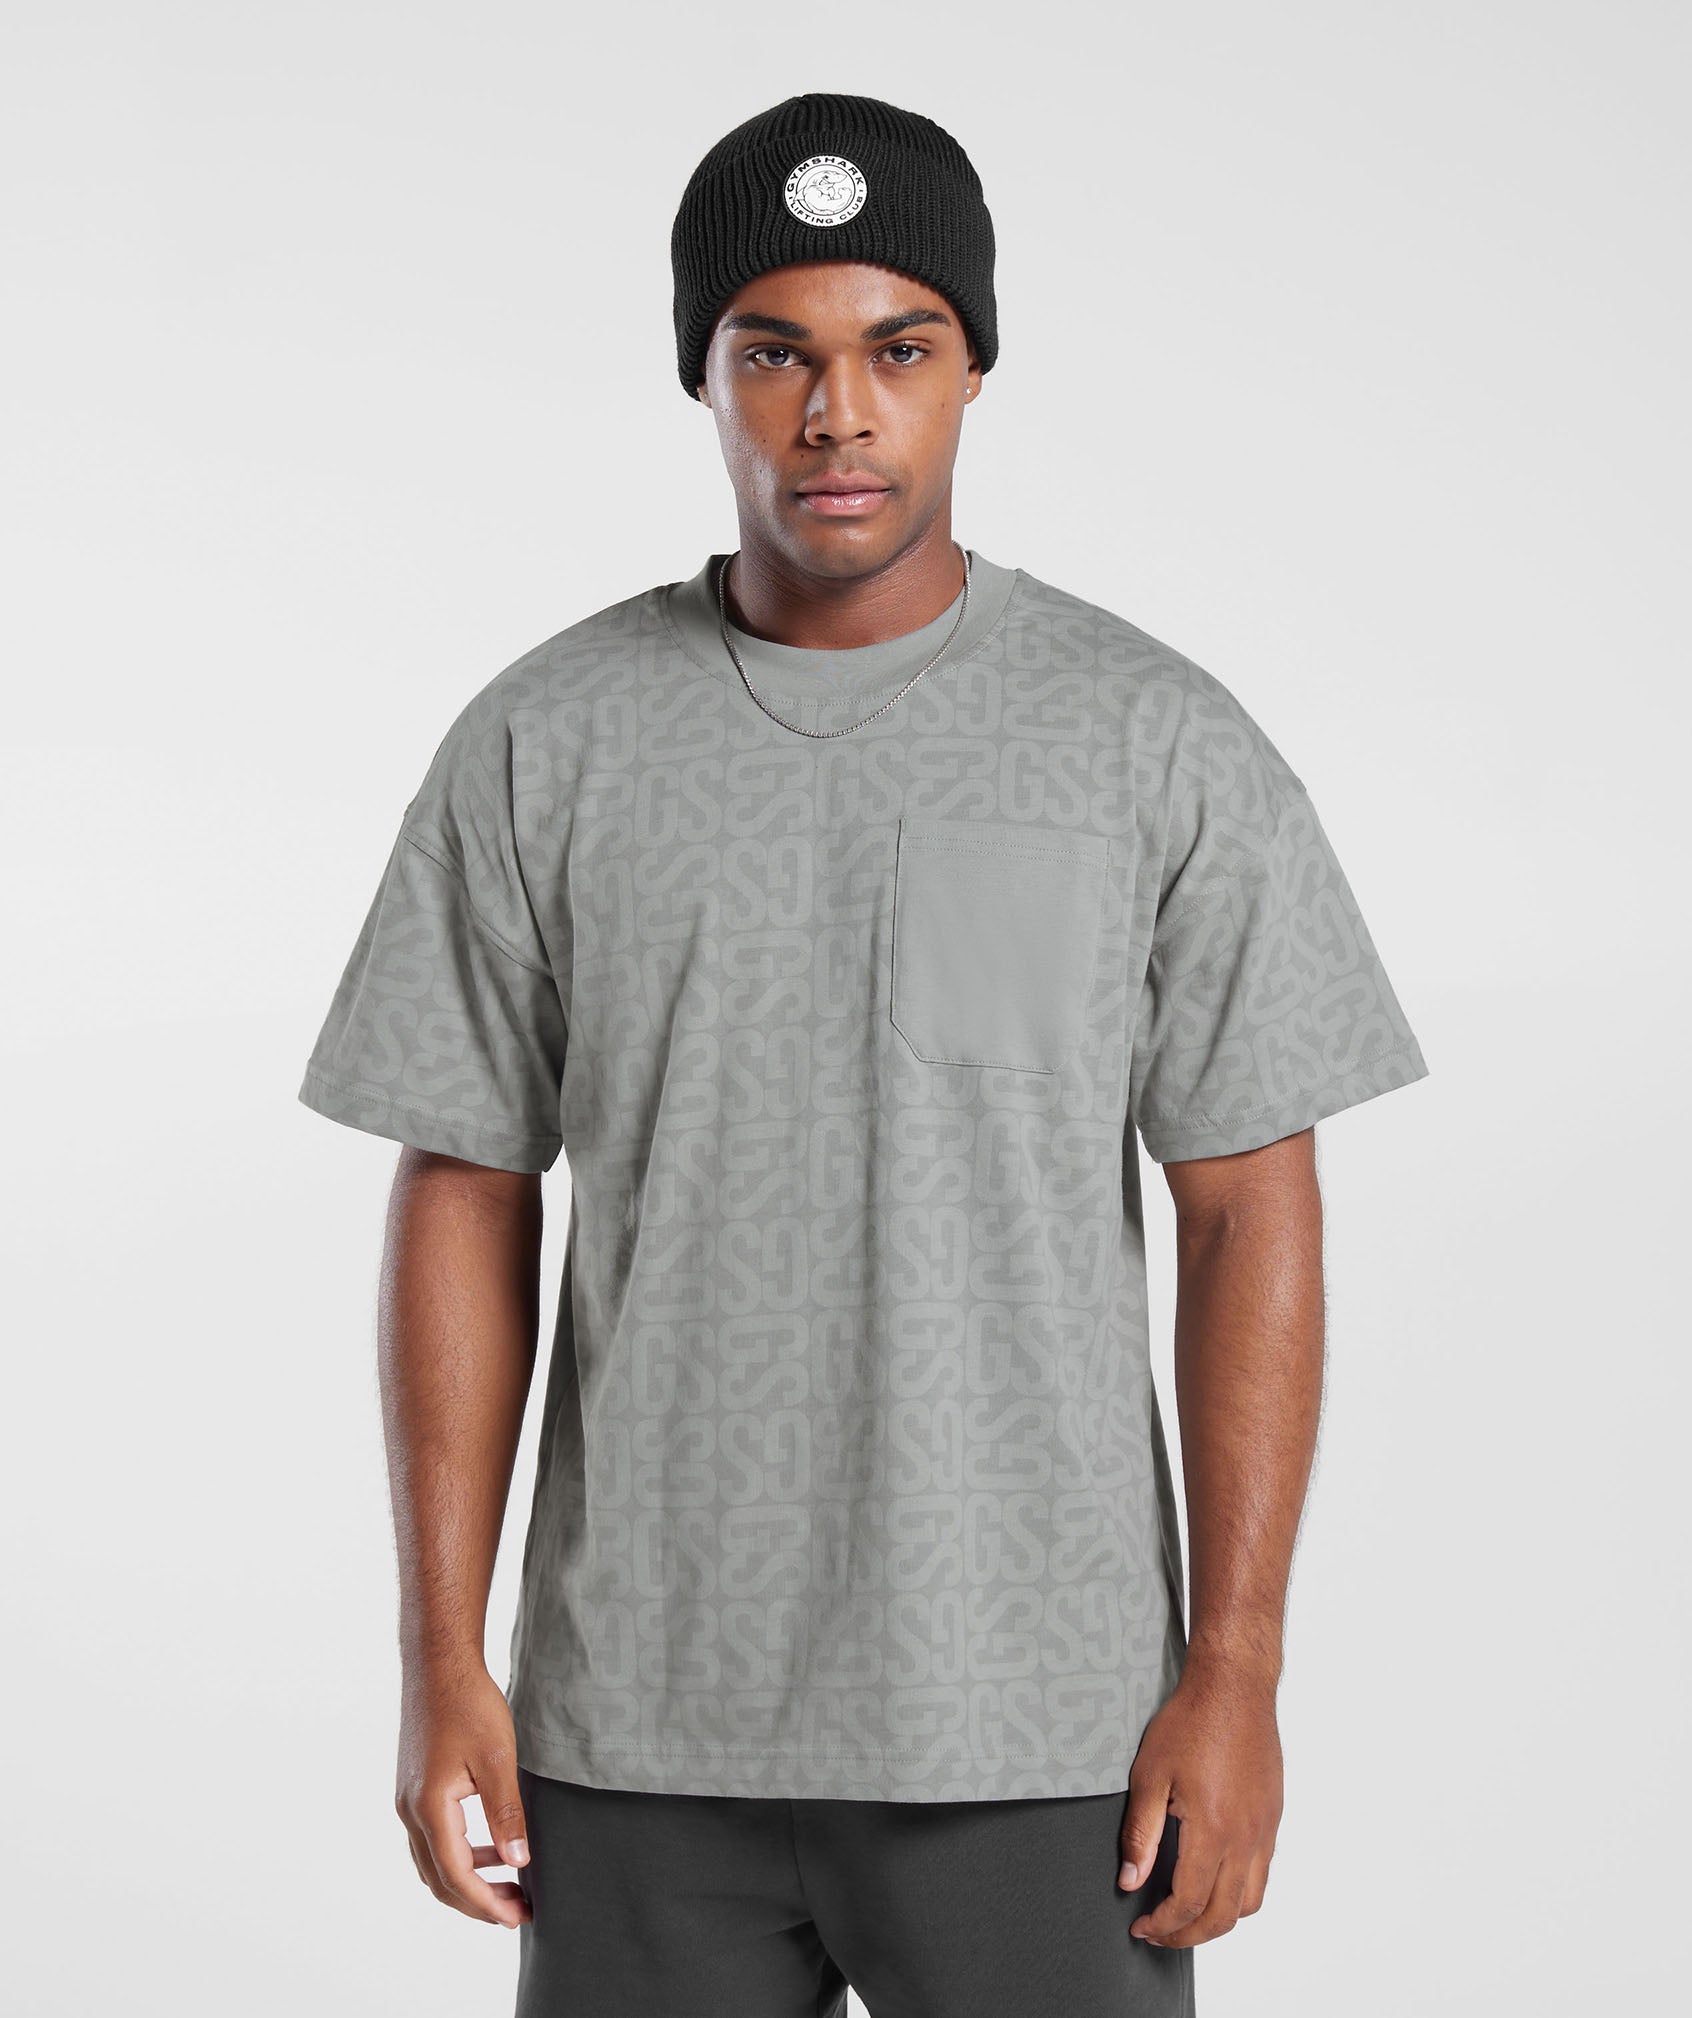 Rest Day T-Shirt in Smokey Grey - view 1